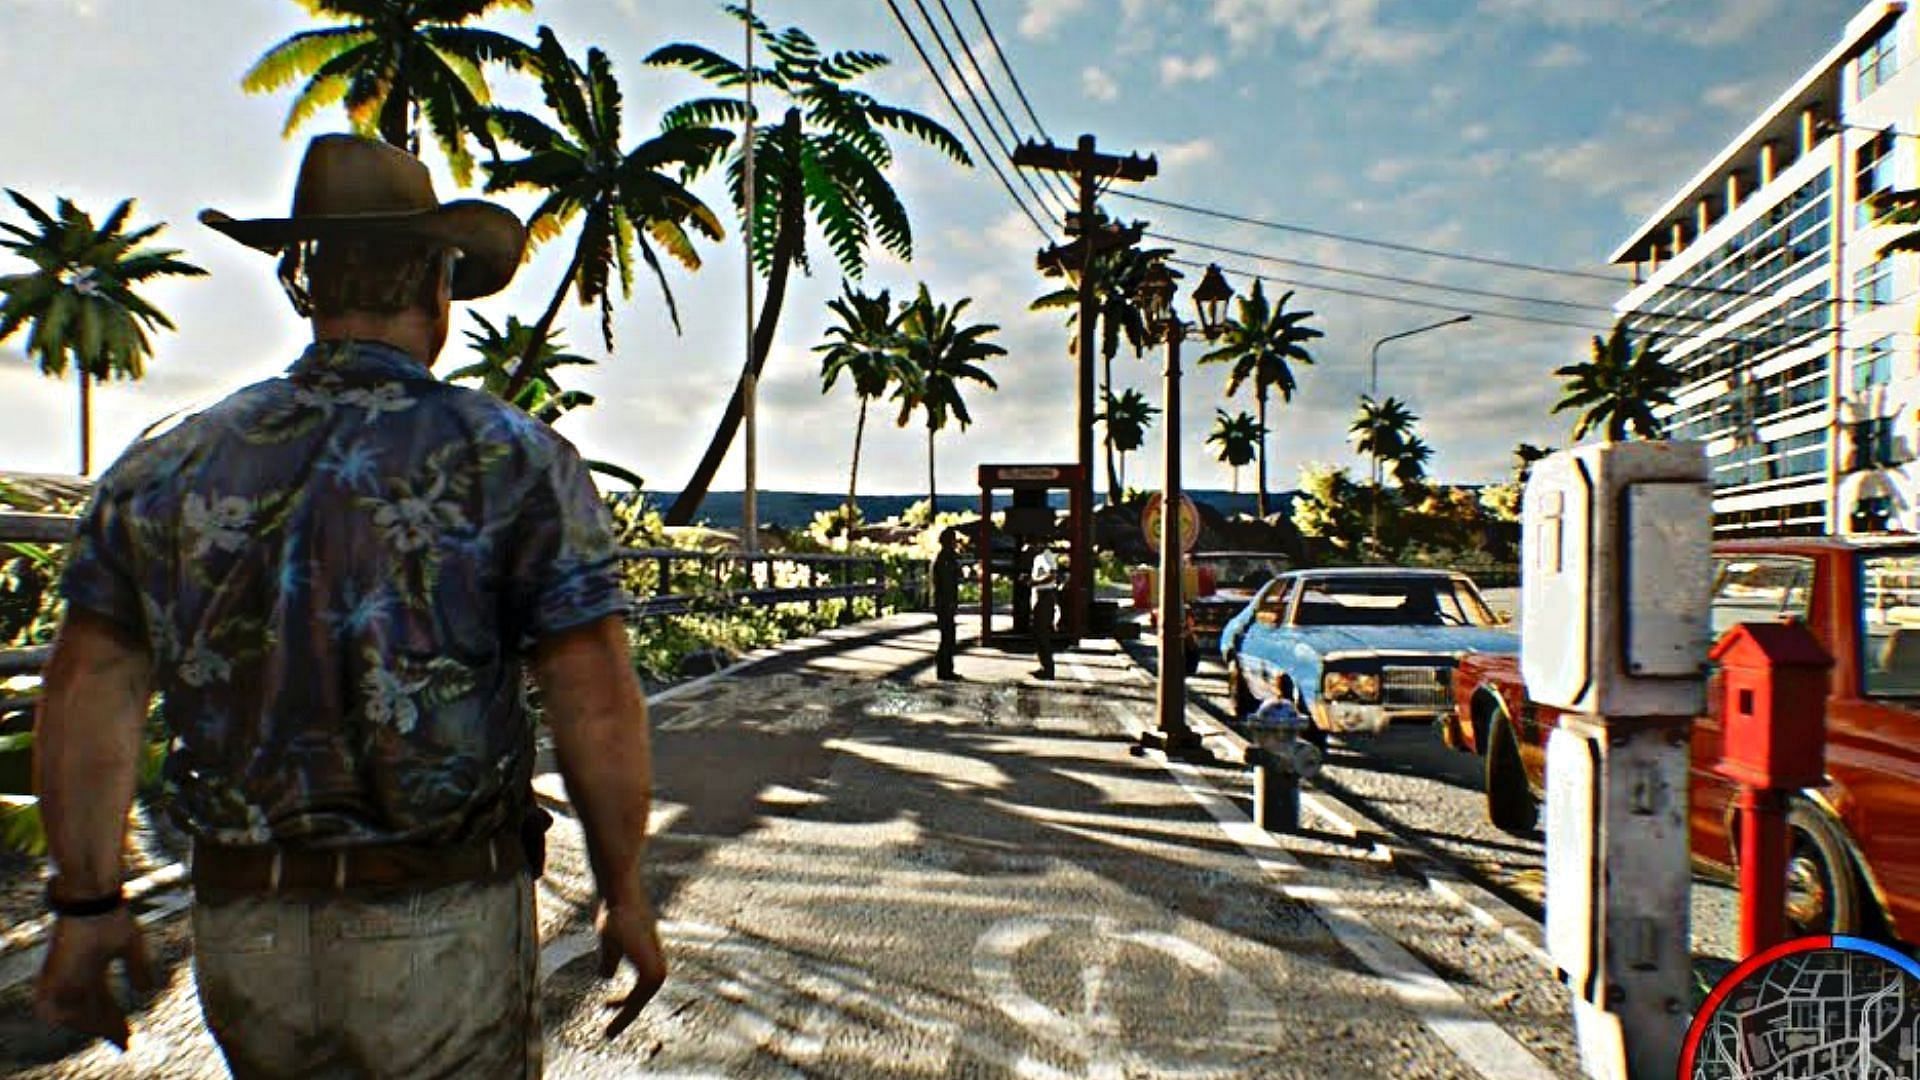 A GTA 6 tease could be arriving later this year (Image via YouTube/TeaserPlay)